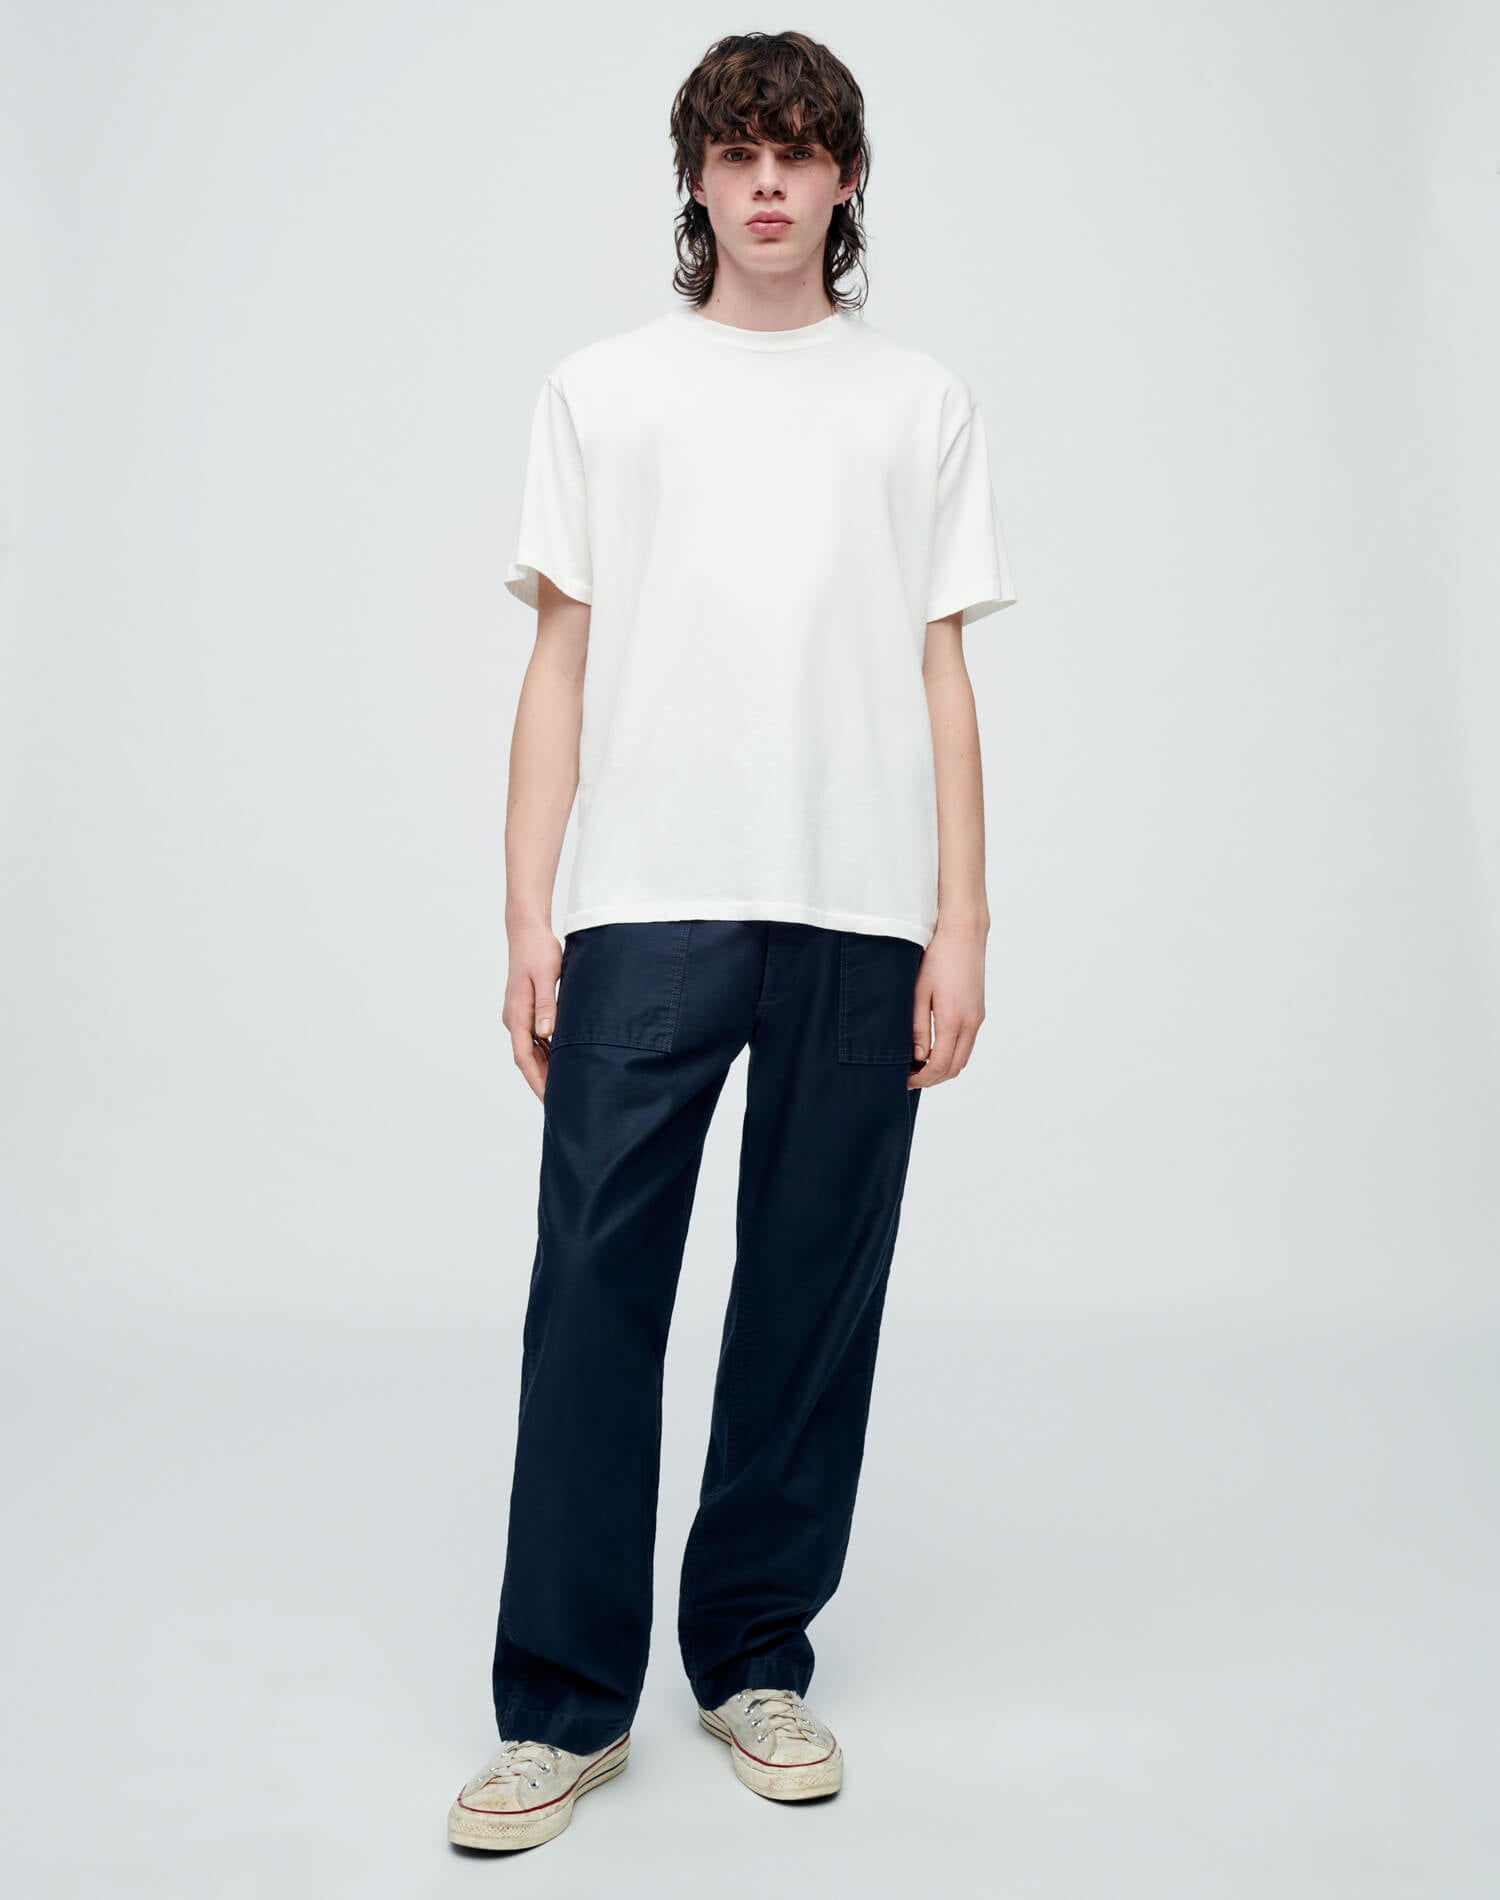 Hanes Loose Tee - Old White